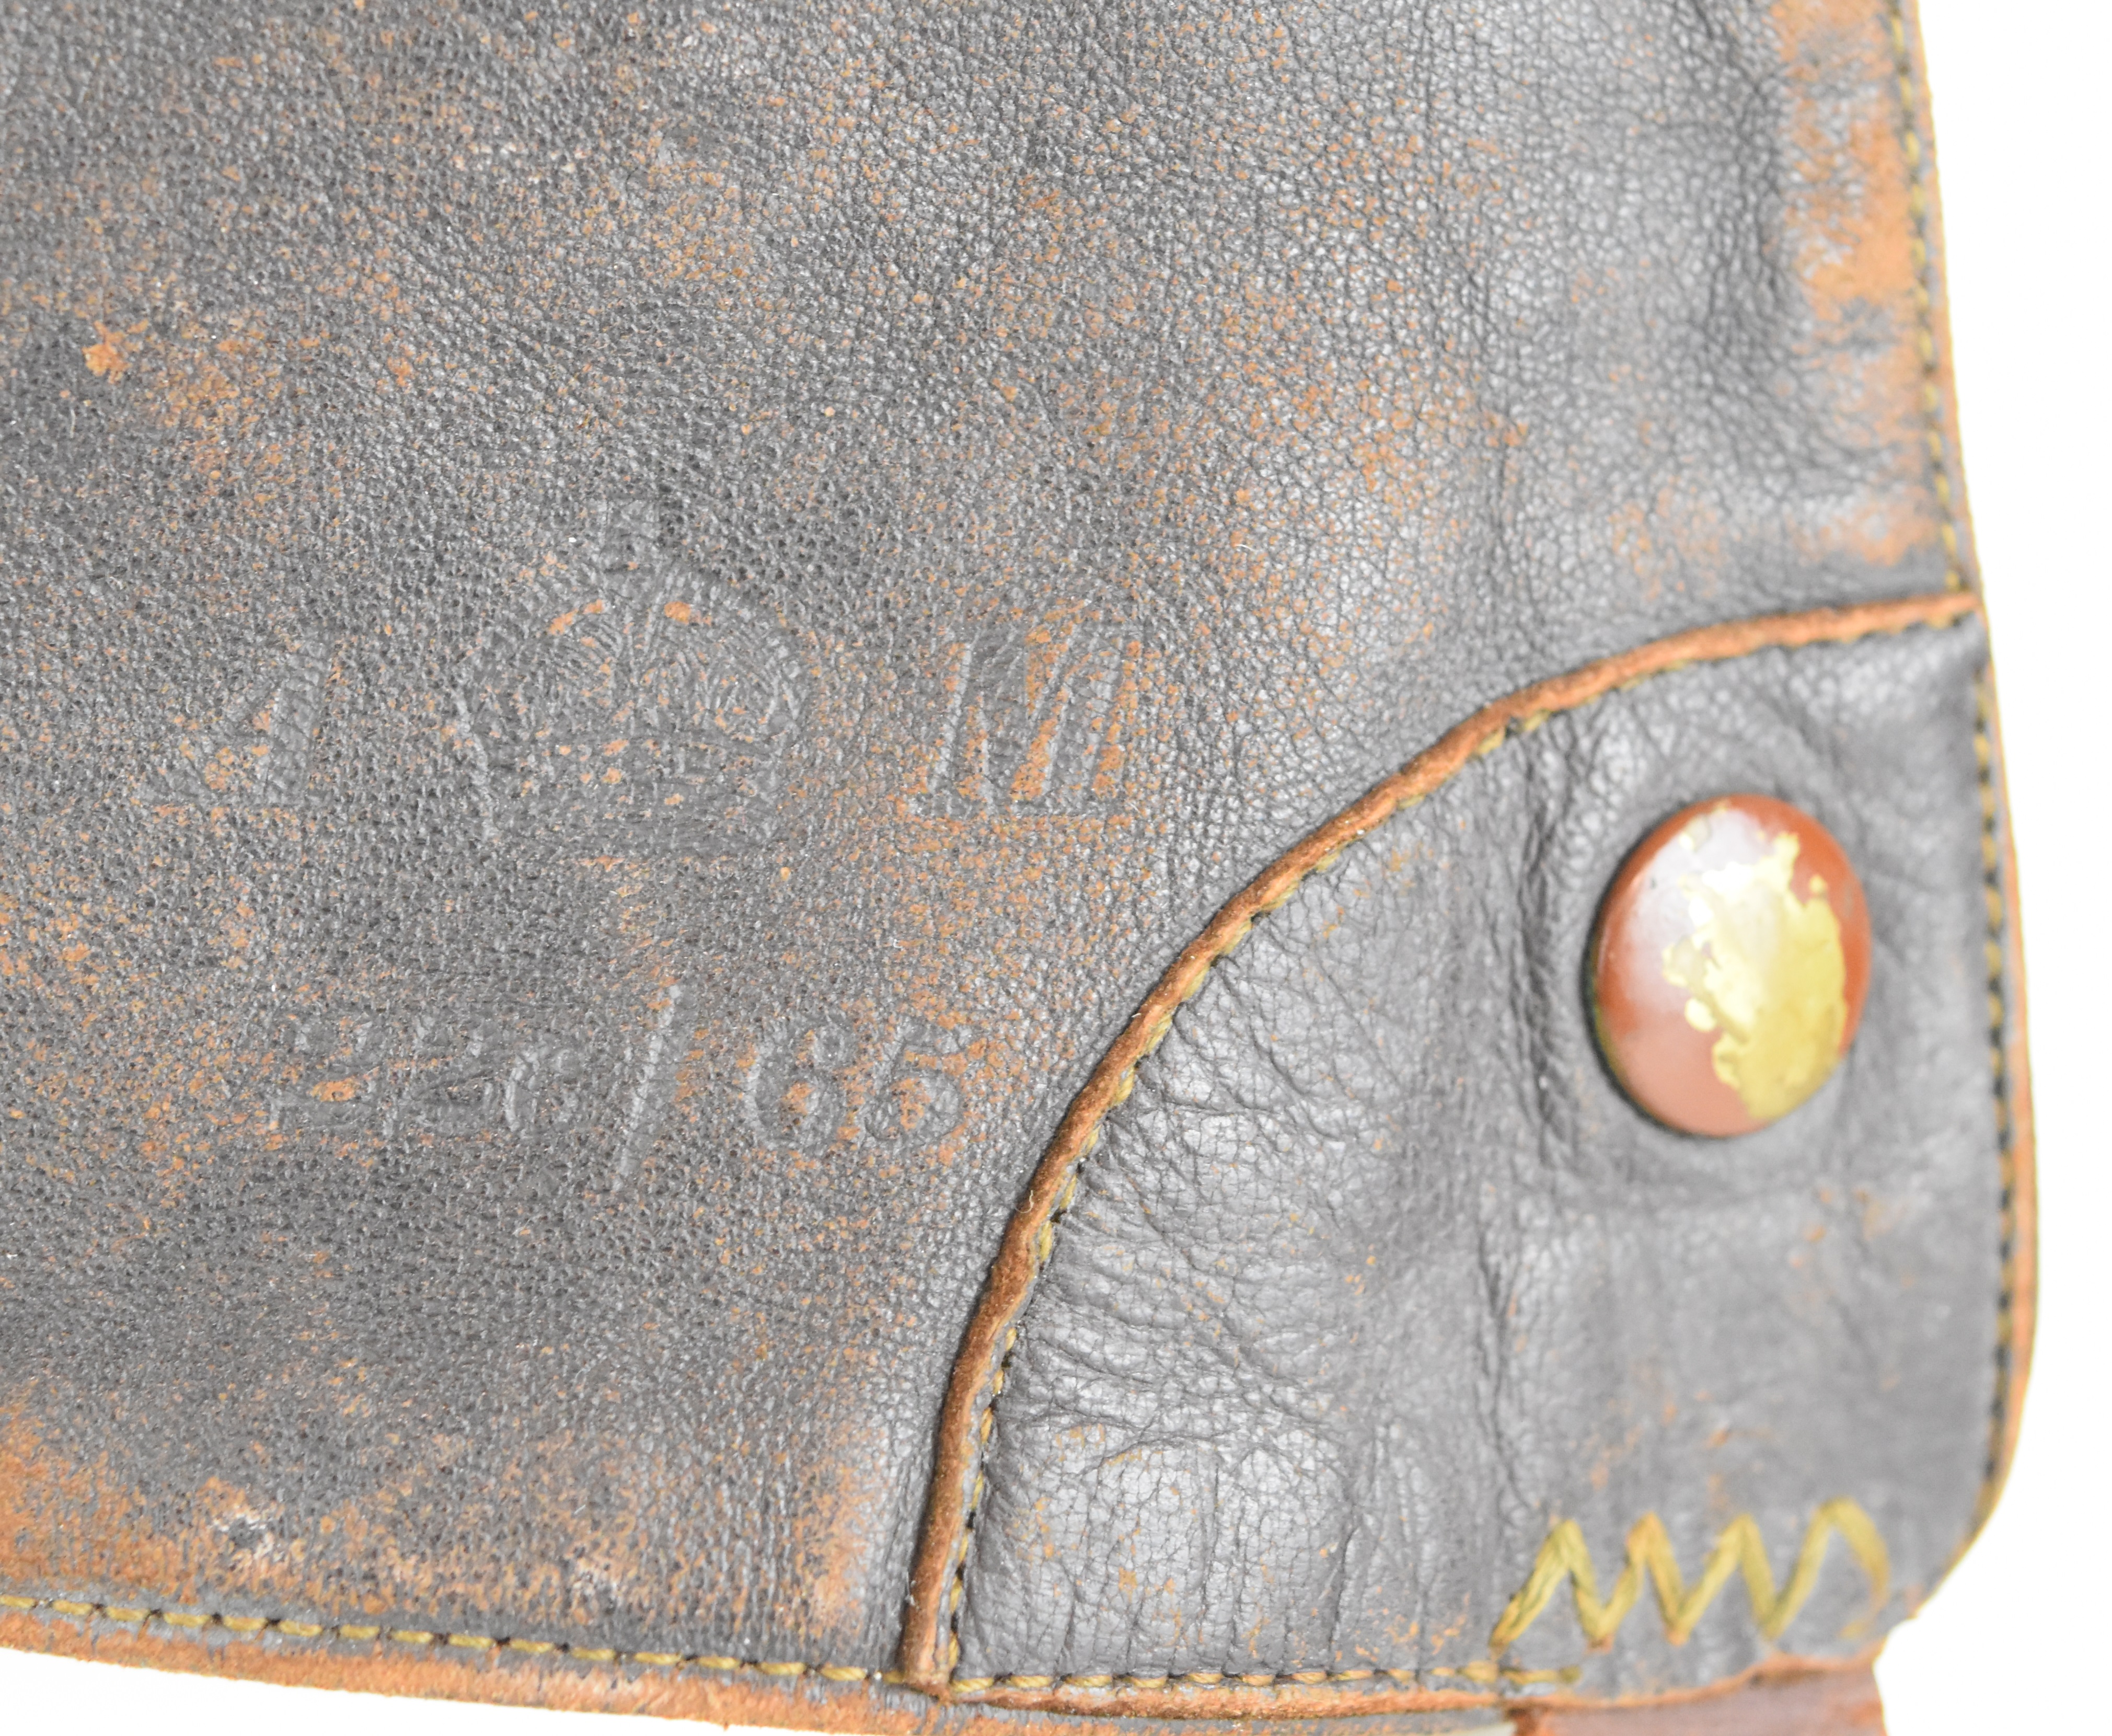 British WW2 leather flying helmet stamped AM 226/65 with label Wareings, Northampton, No 1, size - Image 5 of 8